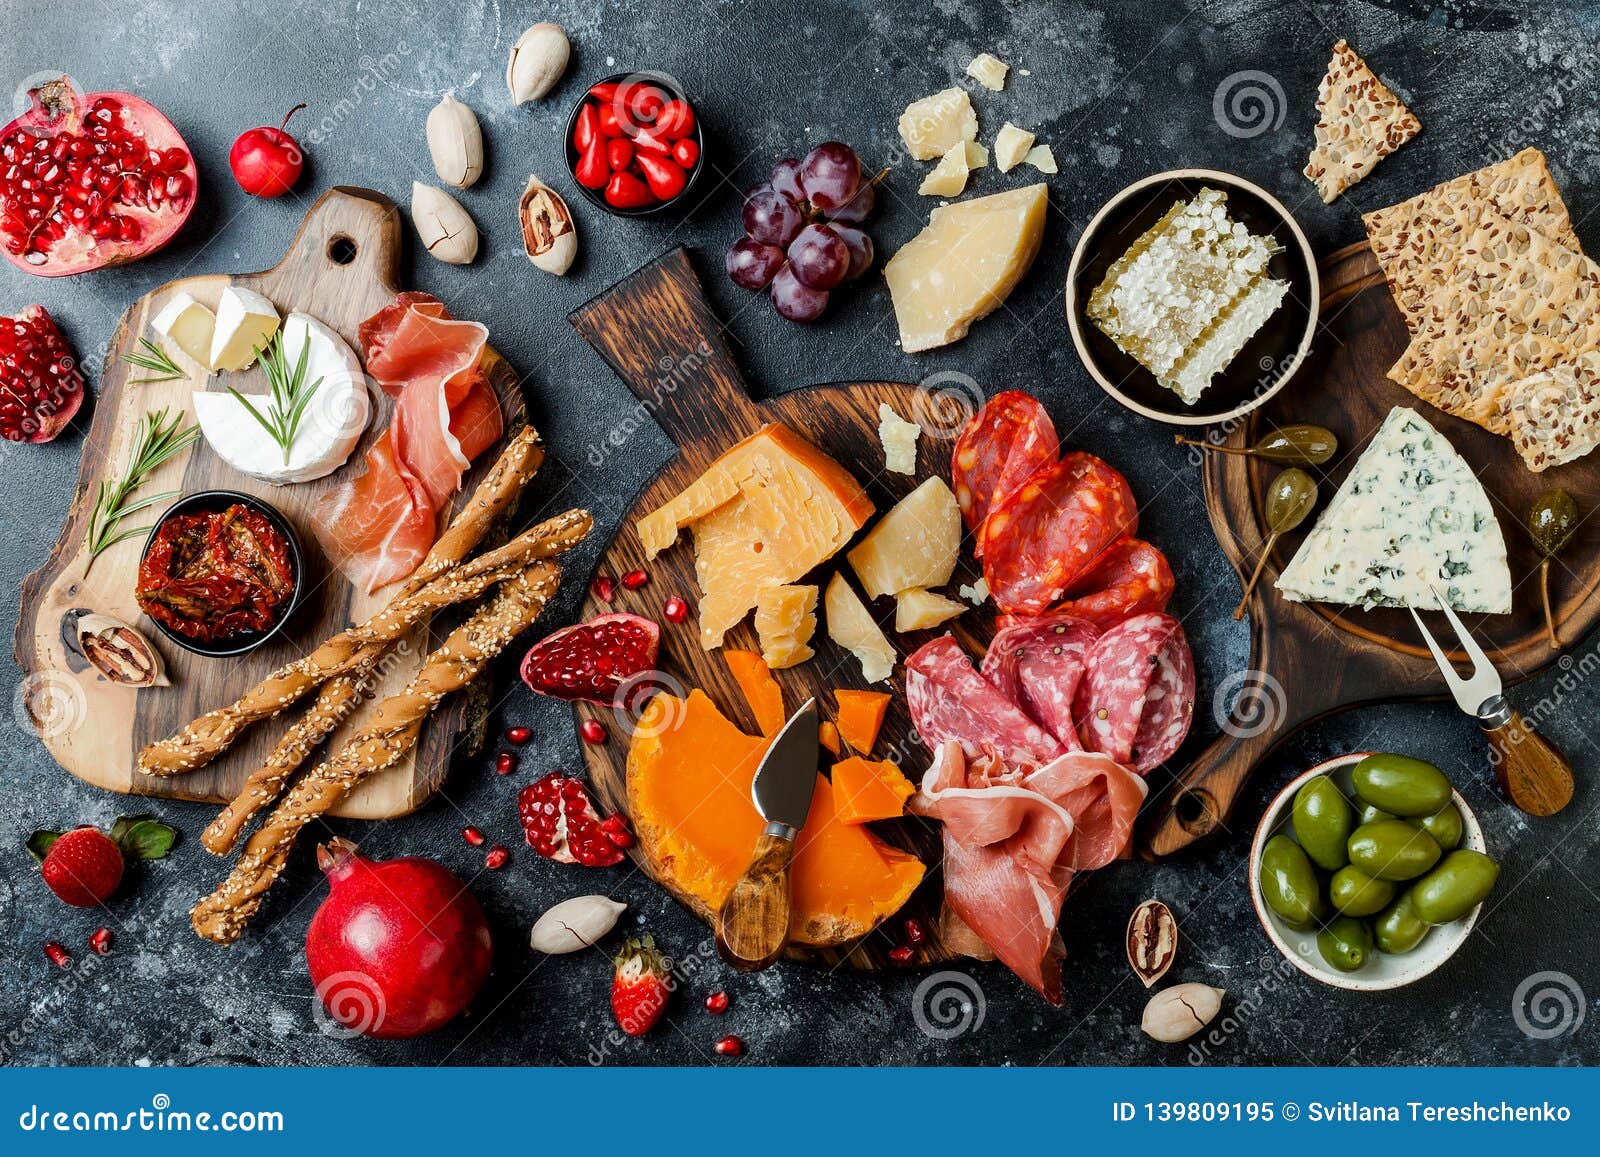 appetizers table with italian antipasti snacks. brushetta or authentic traditional spanish tapas set, cheese variety board